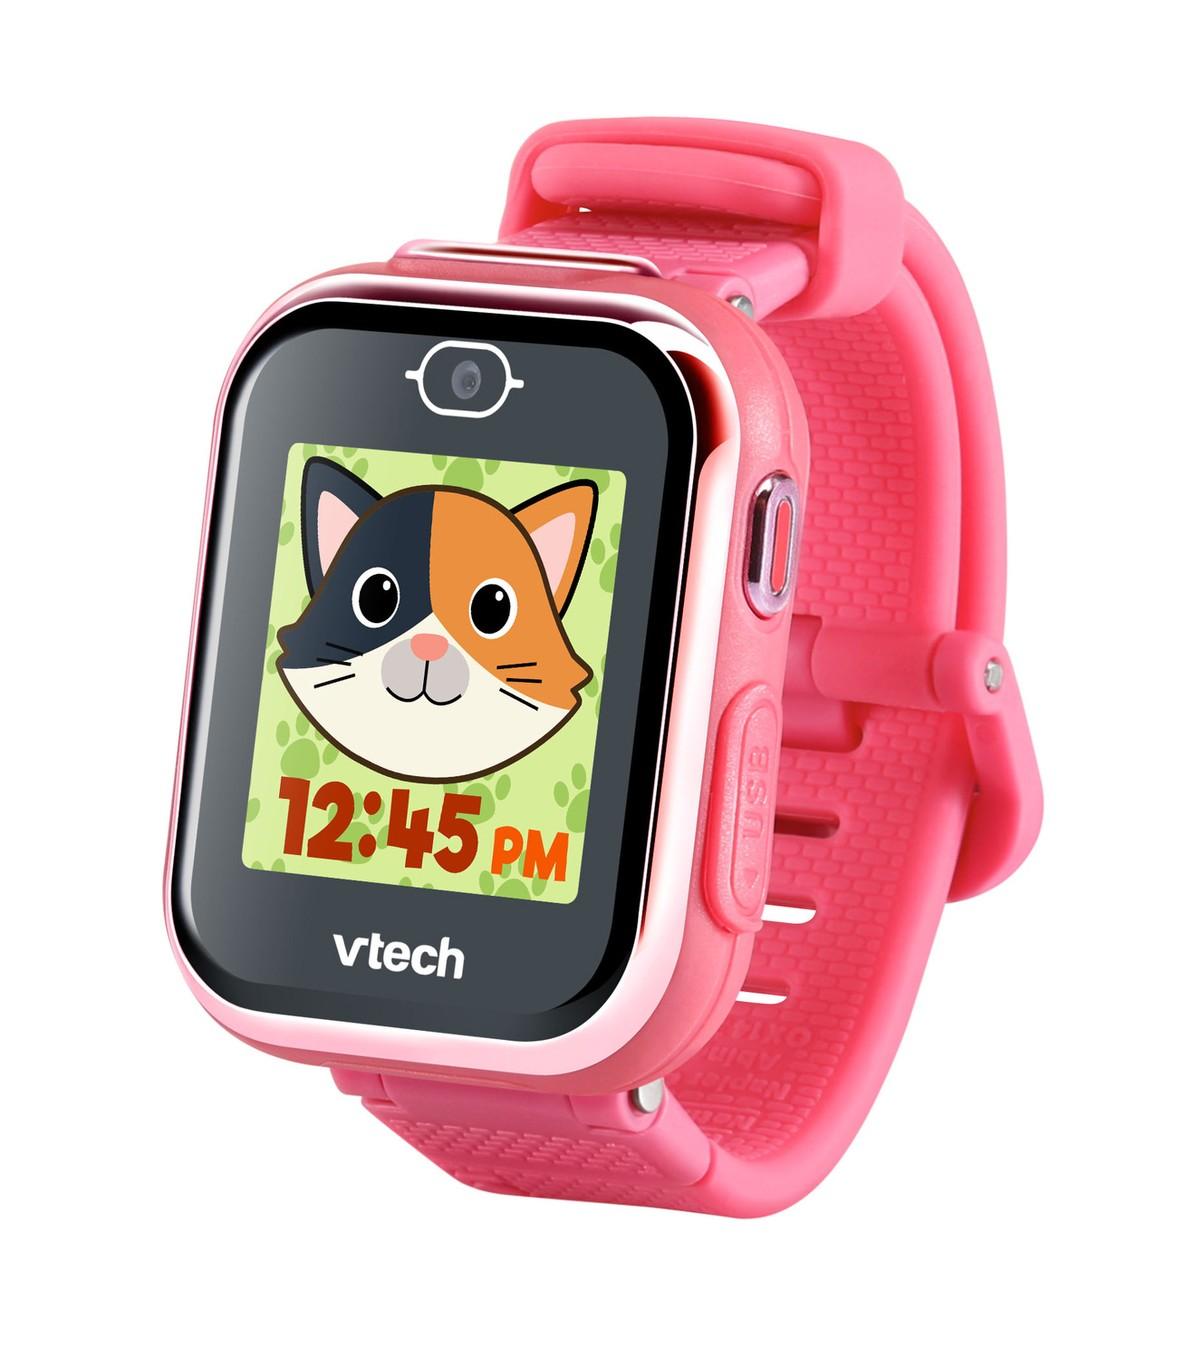 Vtech Kidizoom Smartwatch Max, Blue - Science & Electronic Toys